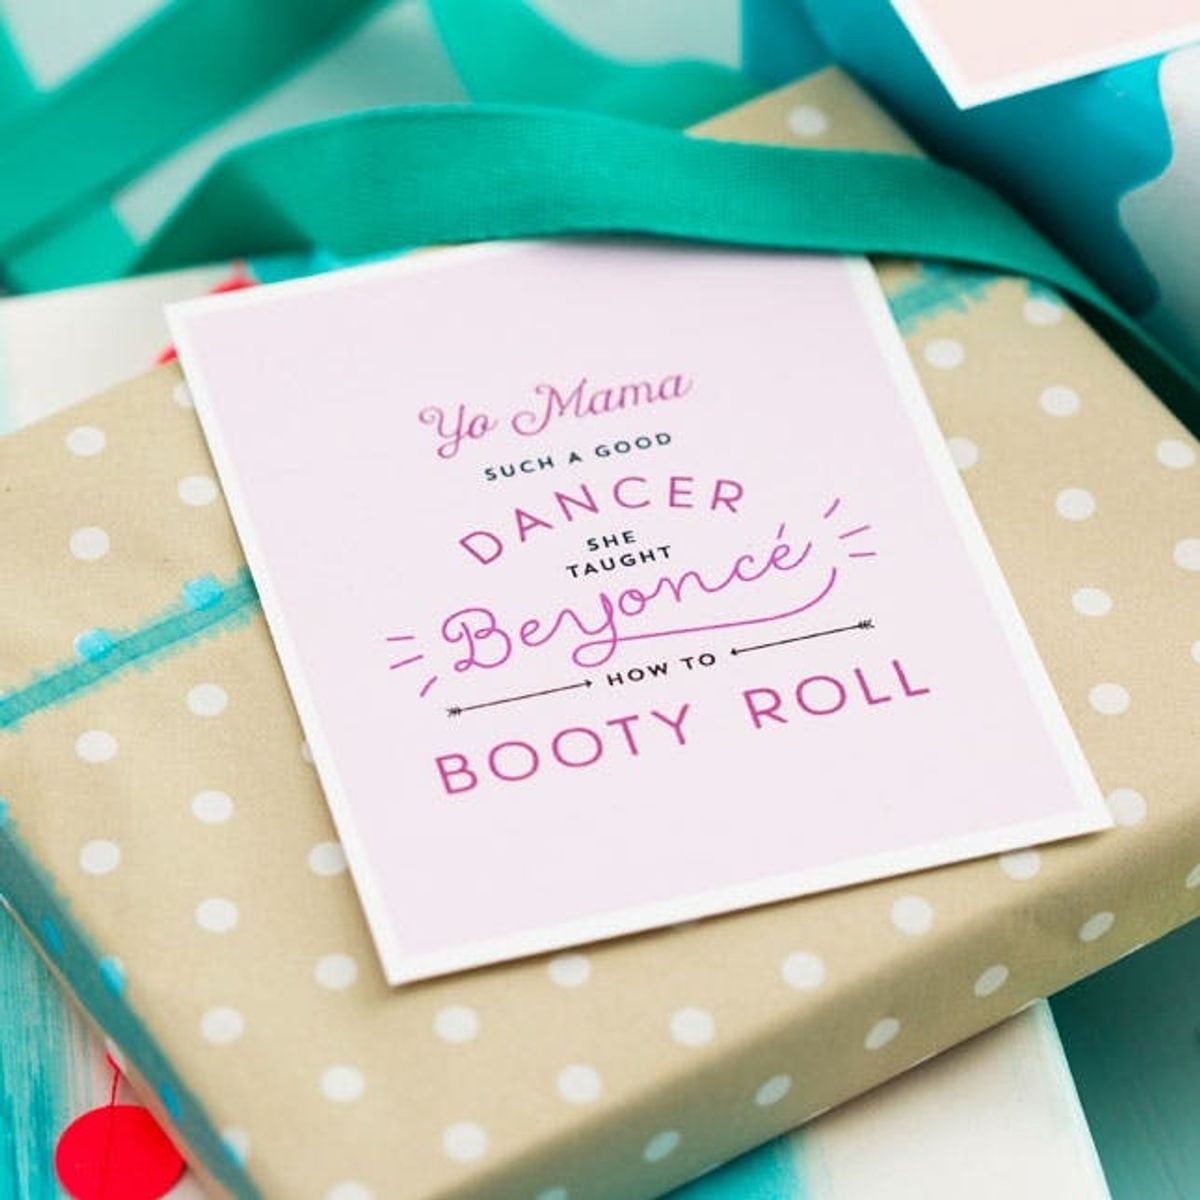 8 Printable “Yo Mama” Cards *YO* Mom Will Love for Mother’s Day